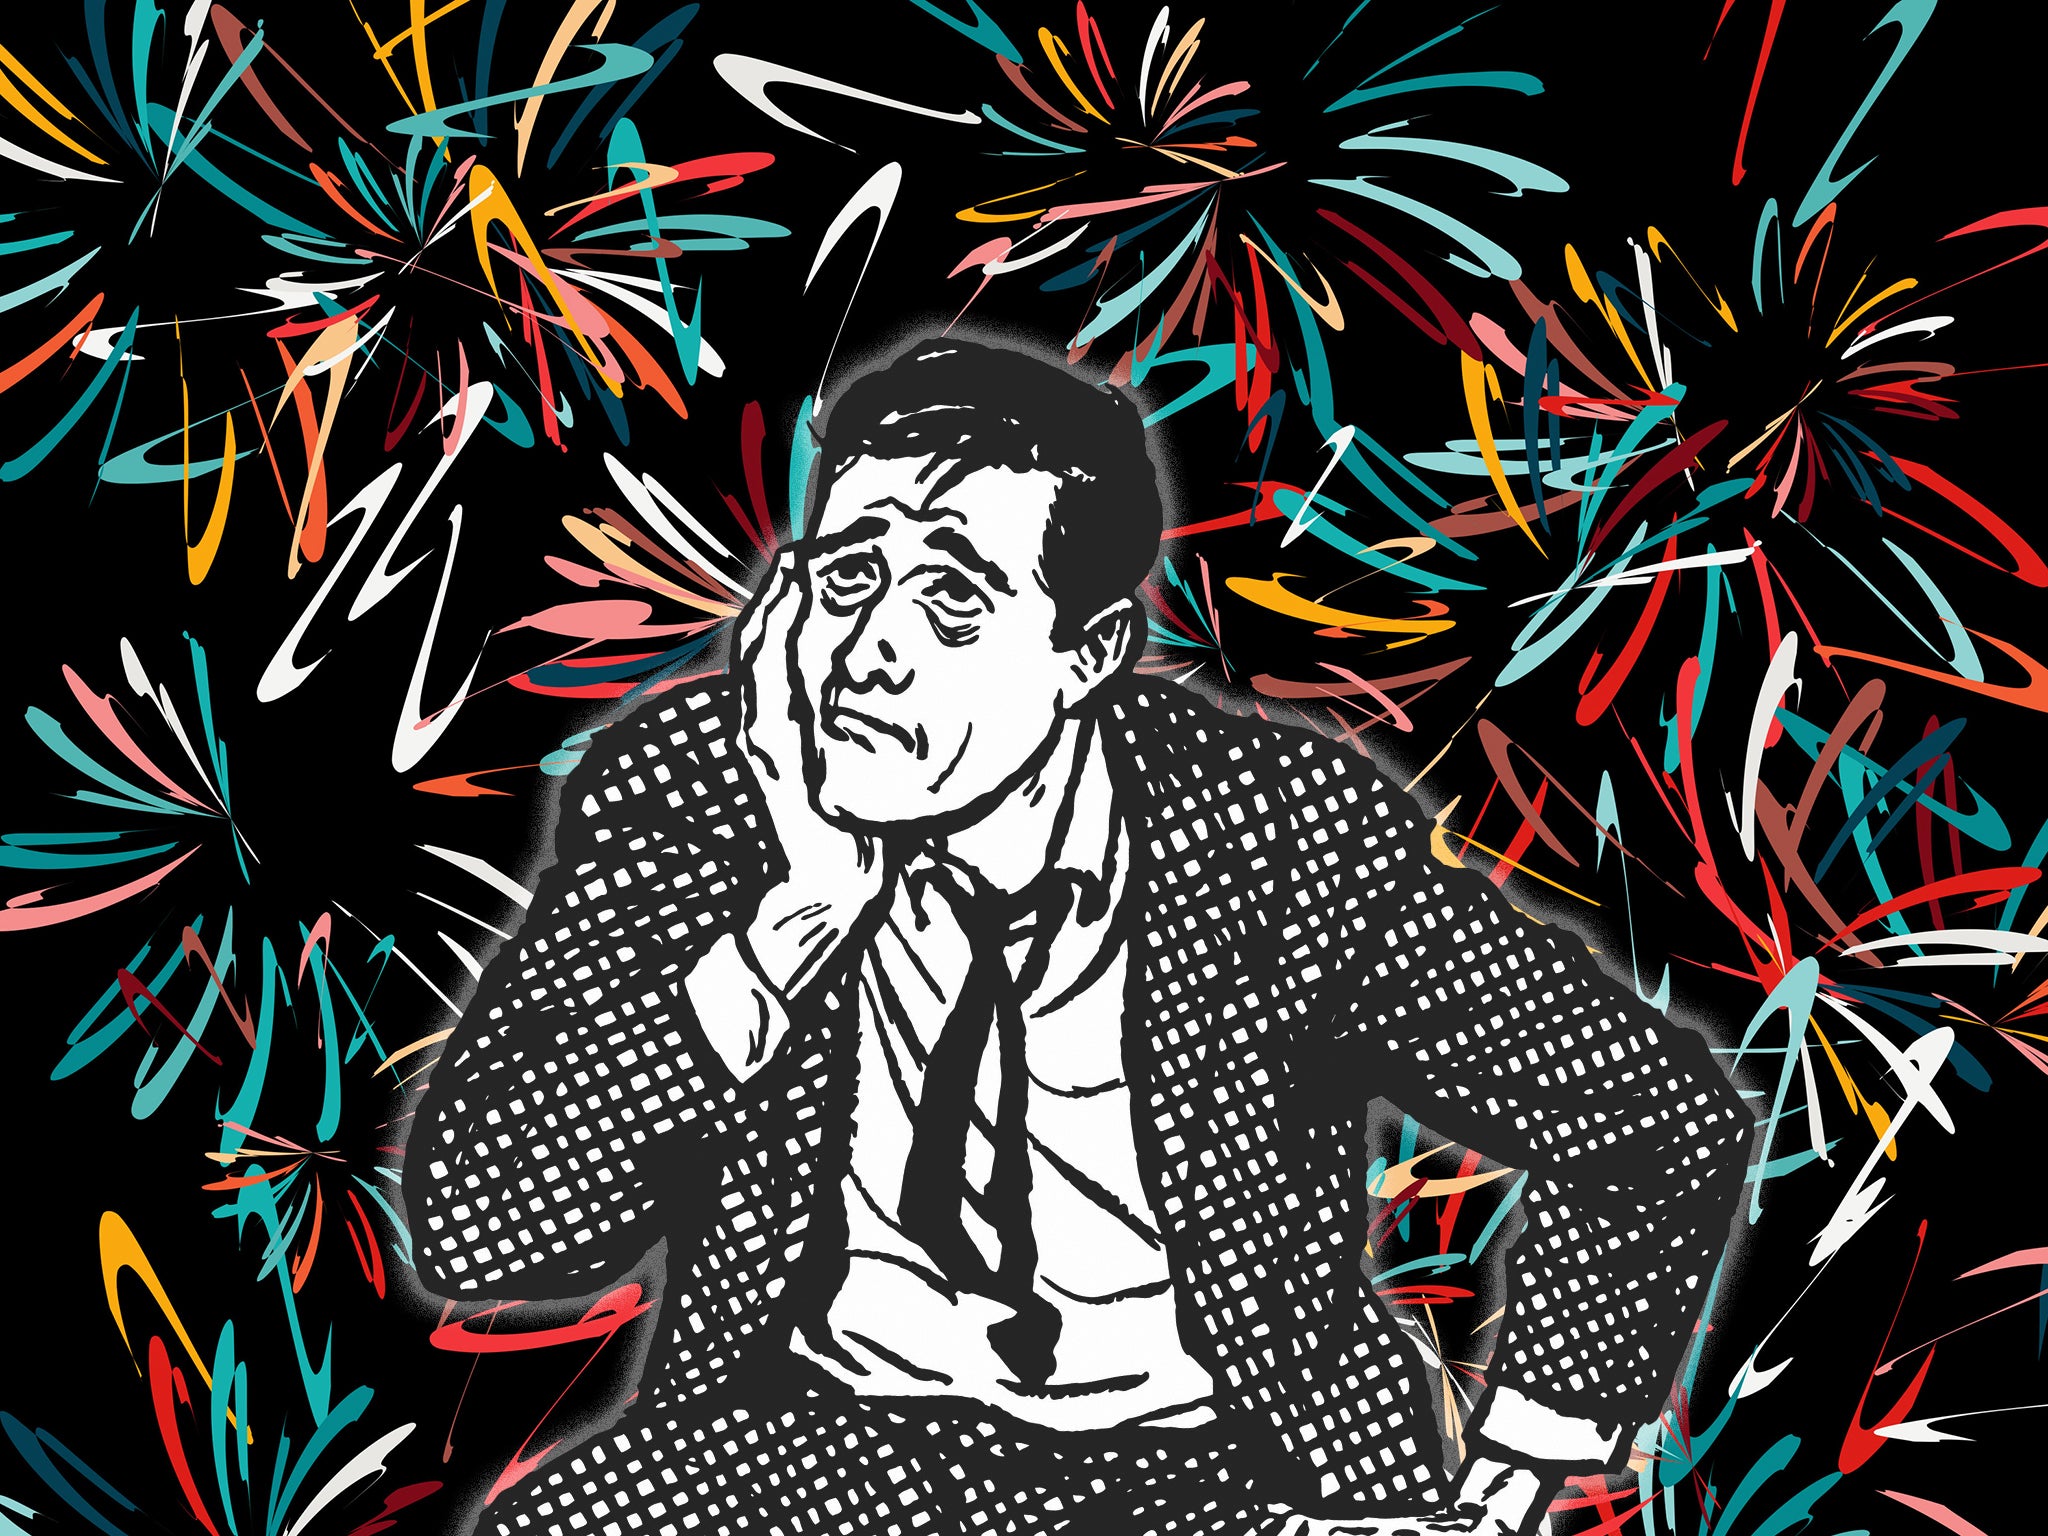 New year melancholy is a condition that affects, well, pretty much everyone